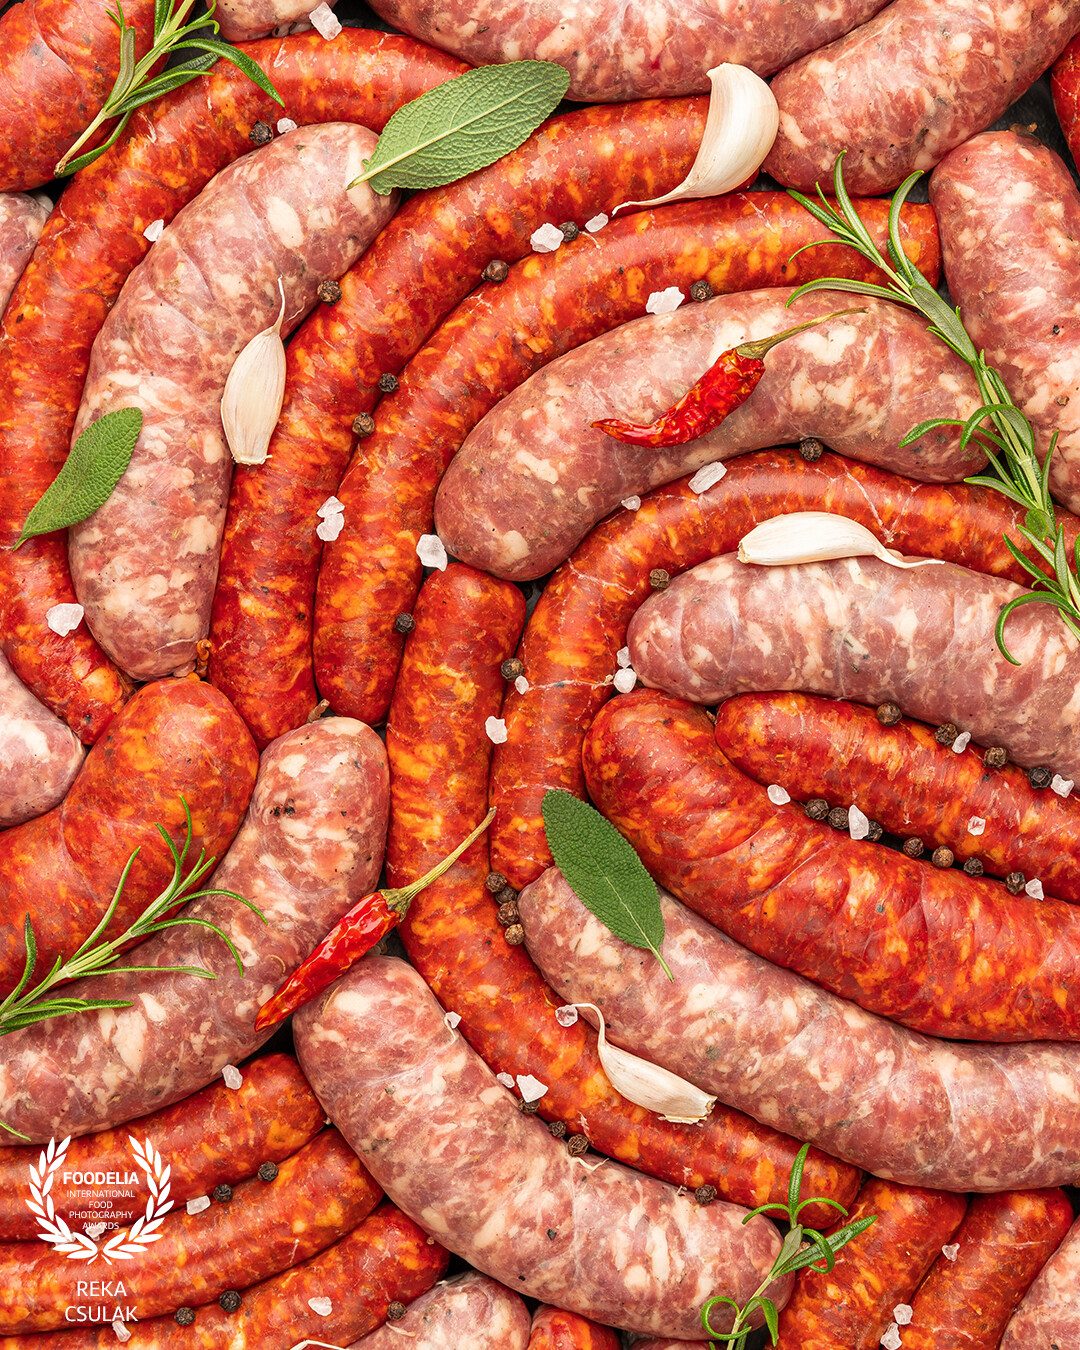 Food pattern created with a selection of hand-made raw sausages and some of their signature spices. Even though raw sausages are a tough subject to shoot commercially, the Client loved my approach.